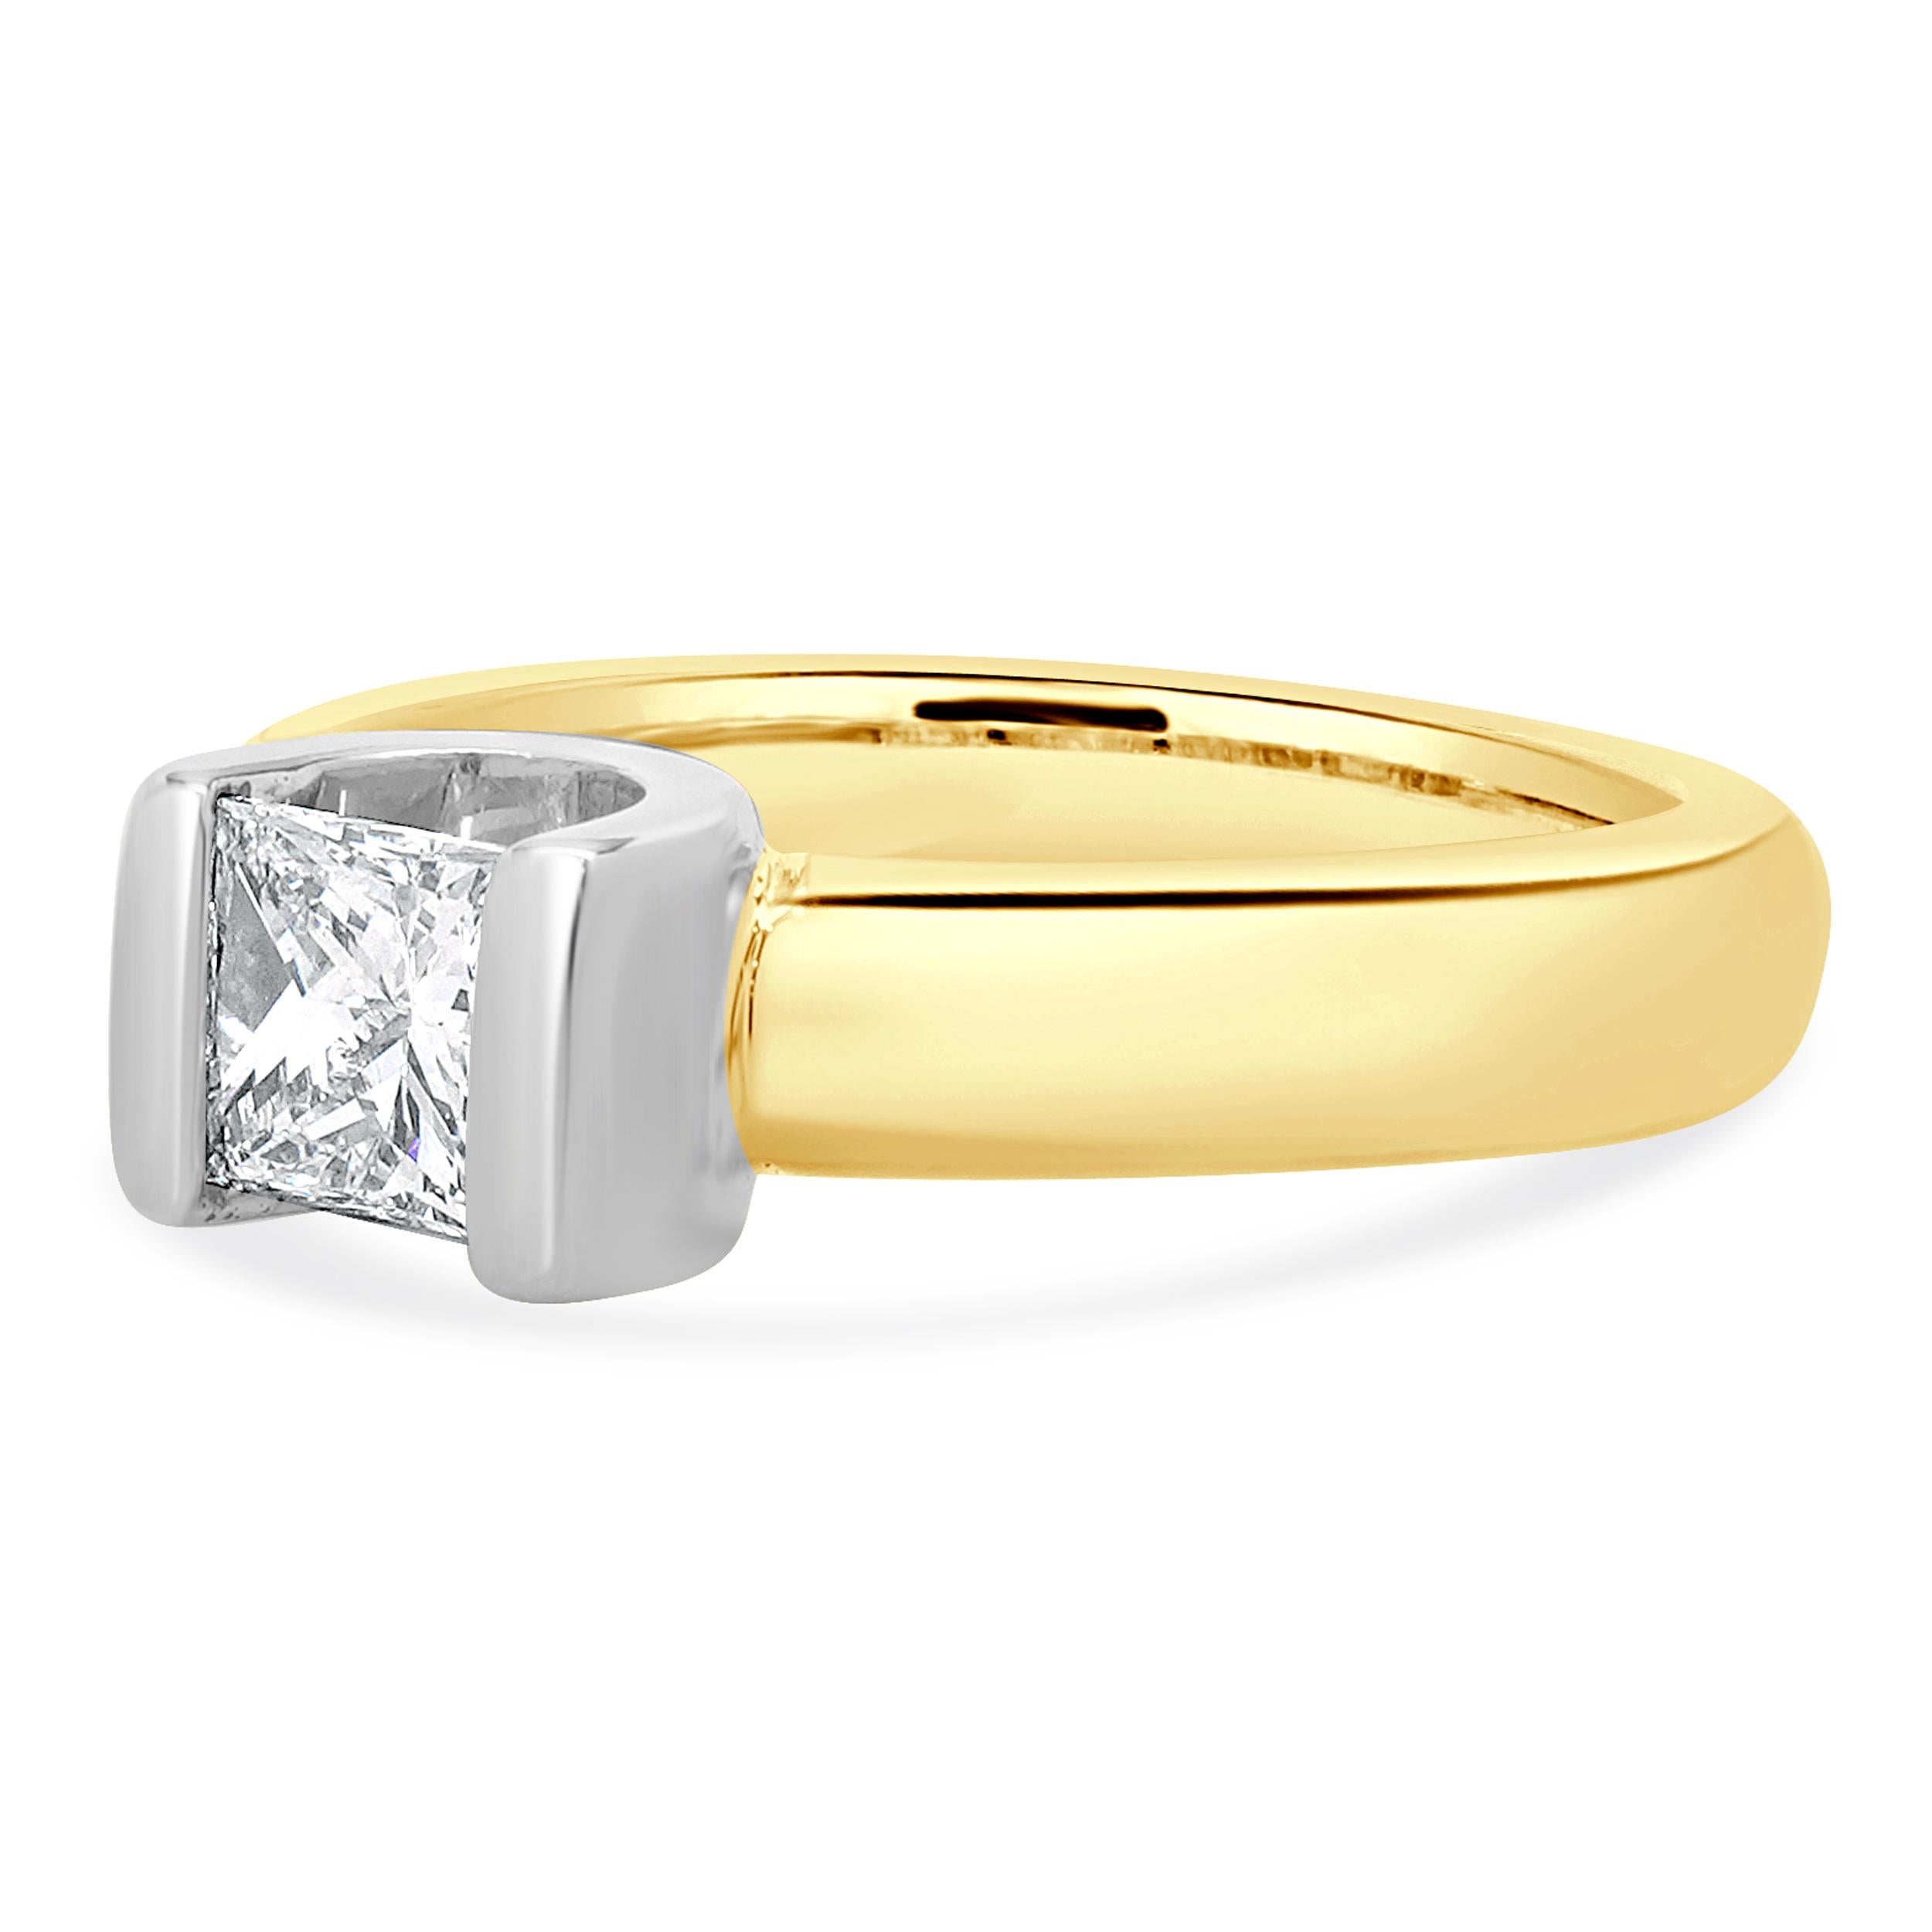 Designer: custom
Material: 14K yellow gold
Center Diamond: 1 princess cut = 0.63ct
Color : G
Clarity : VS2
GIA: 5231143621
Size: 6 complimentary sizing available 
Weight: 5.93 grams
